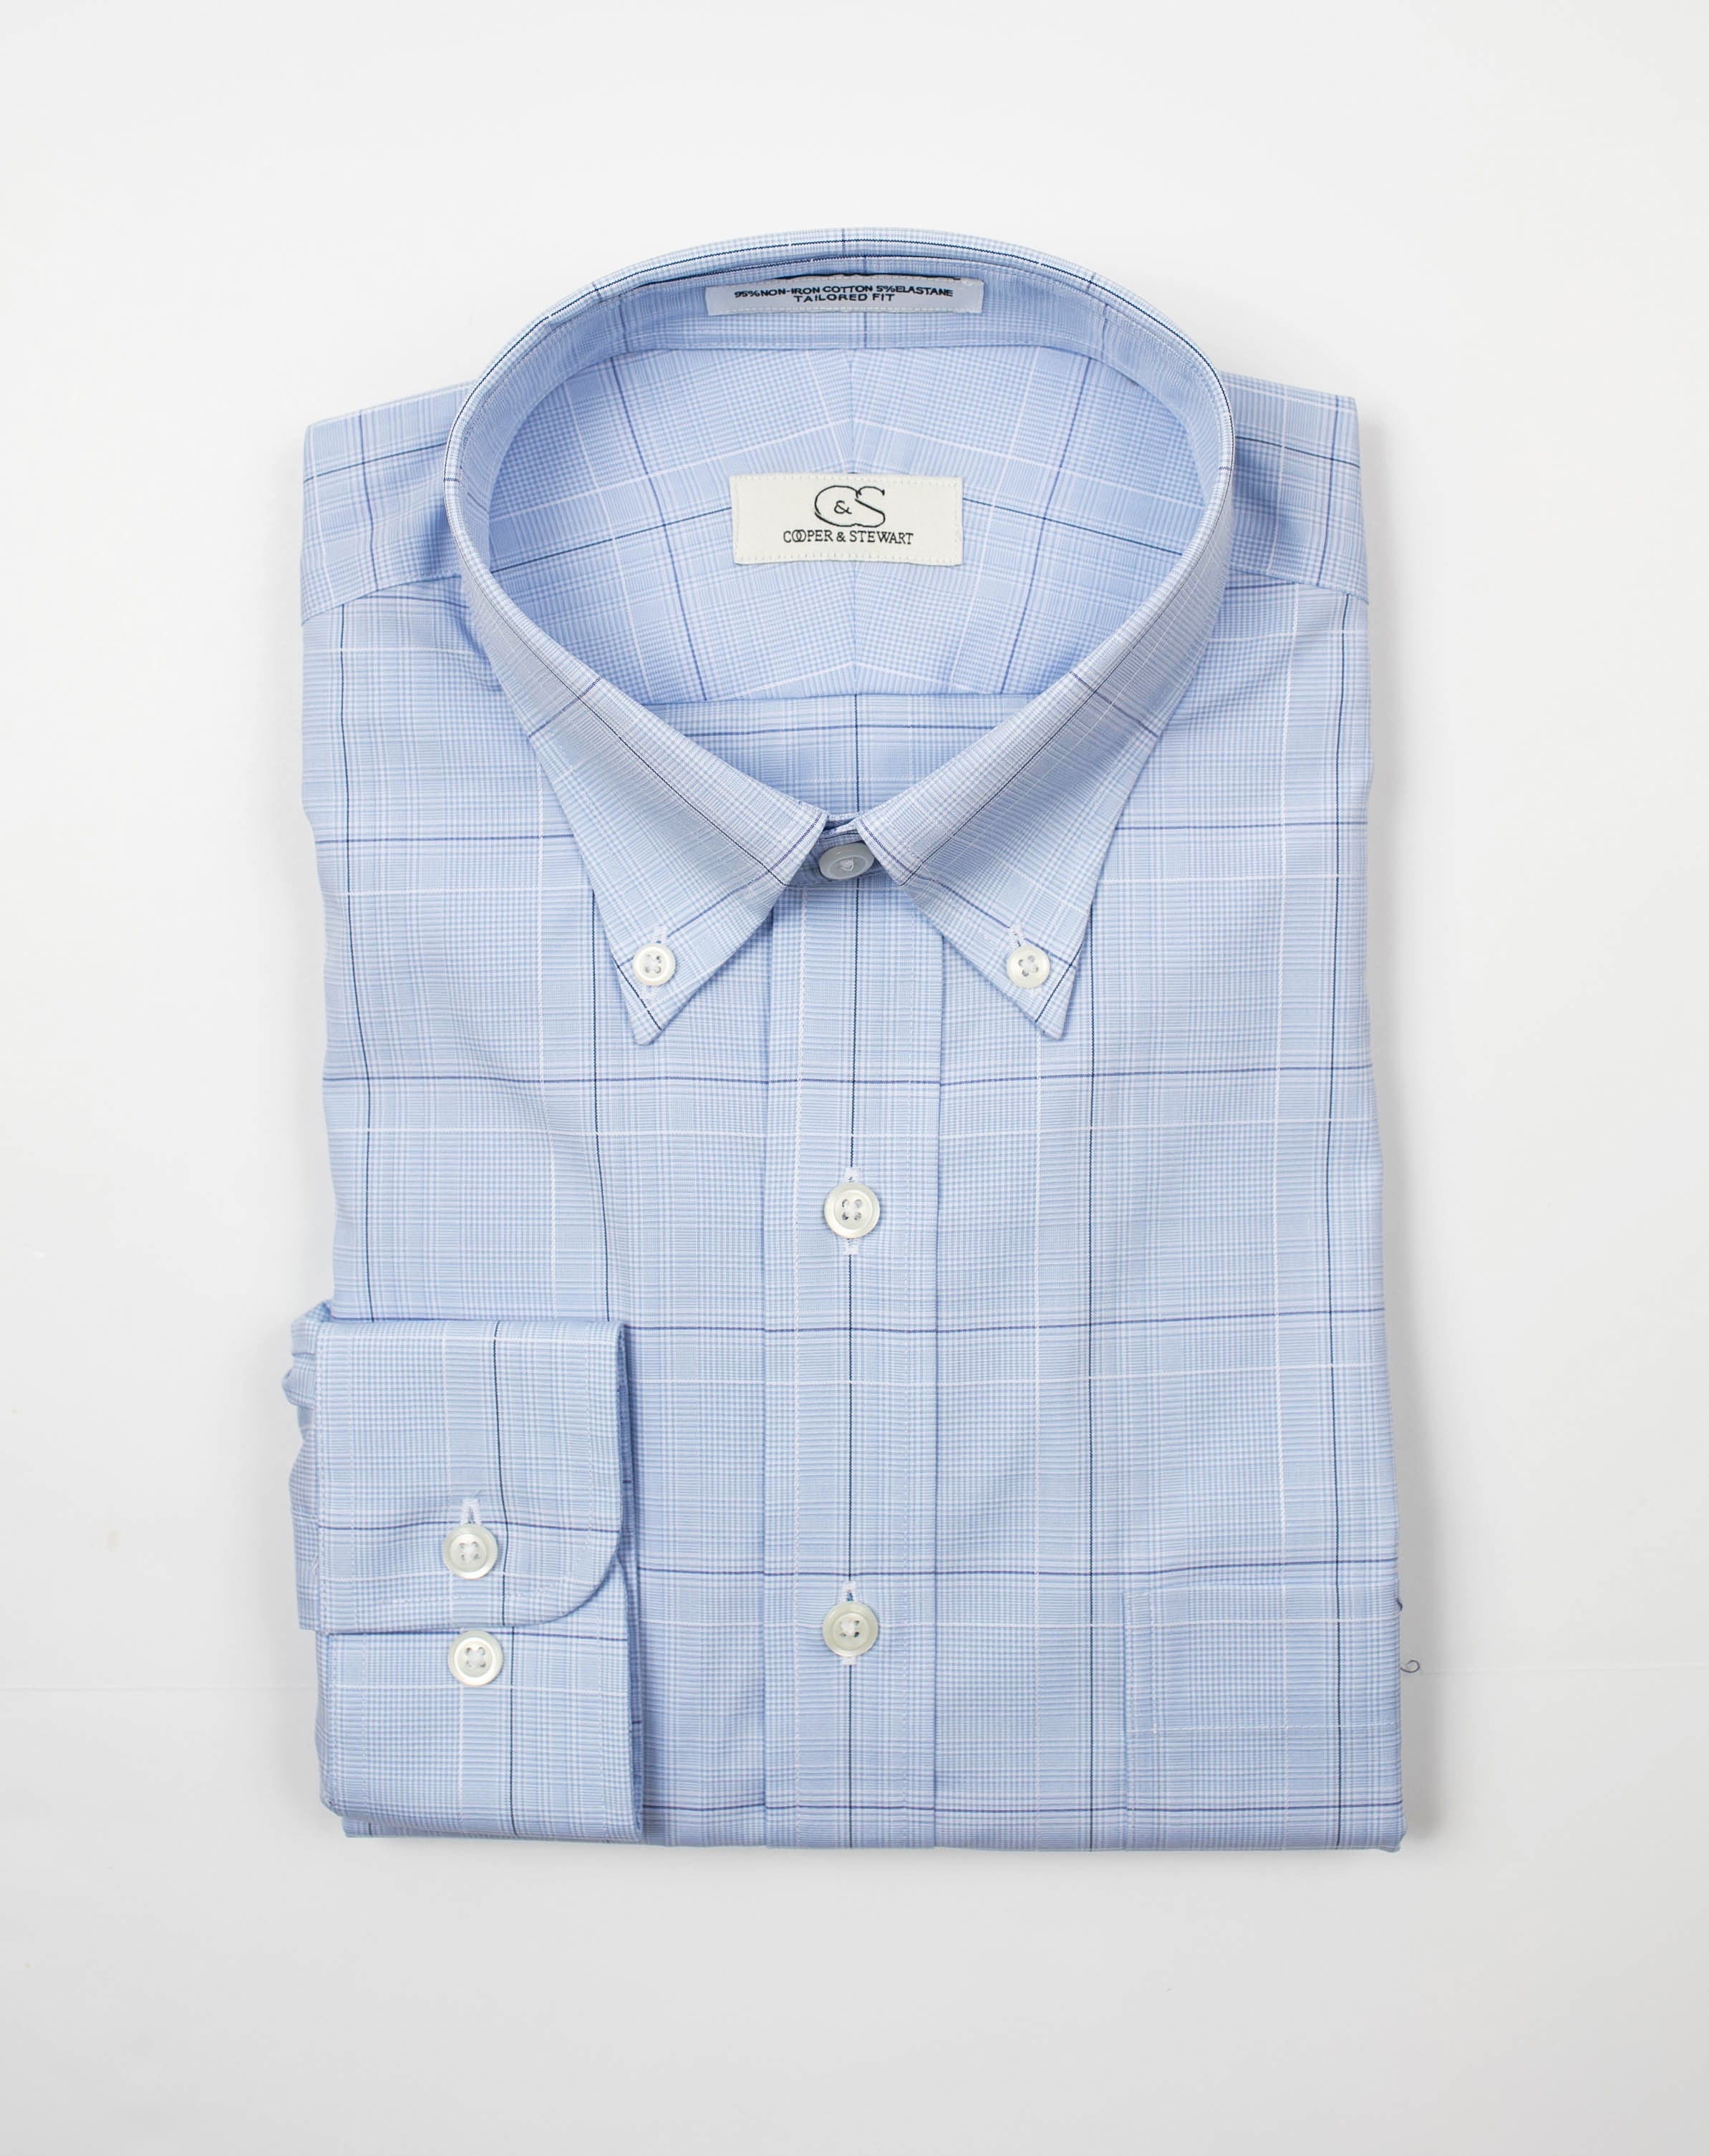 021 TF BD - Blue Ground Square Box Check Tailored Fit Button Down Collar